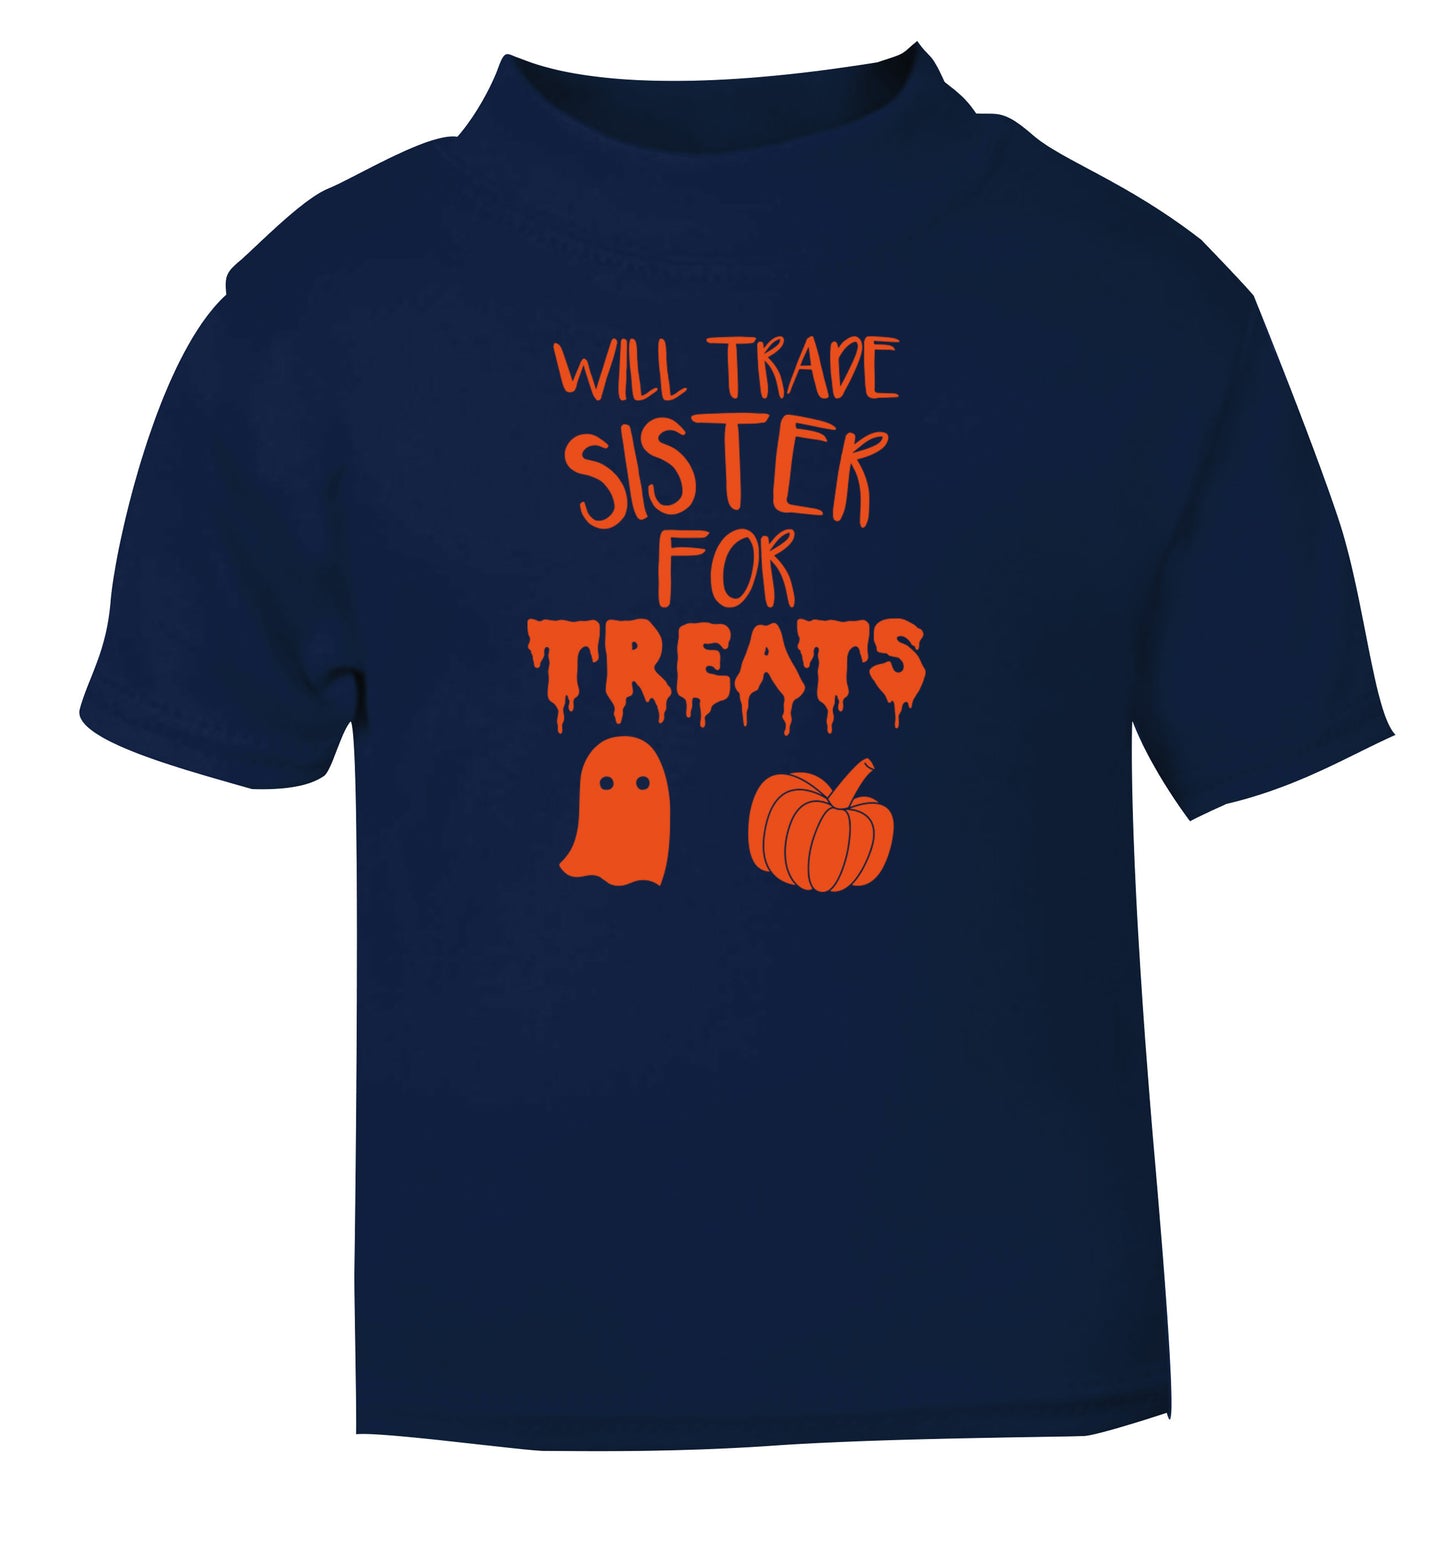 Will trade sister for treats navy Baby Toddler Tshirt 2 Years